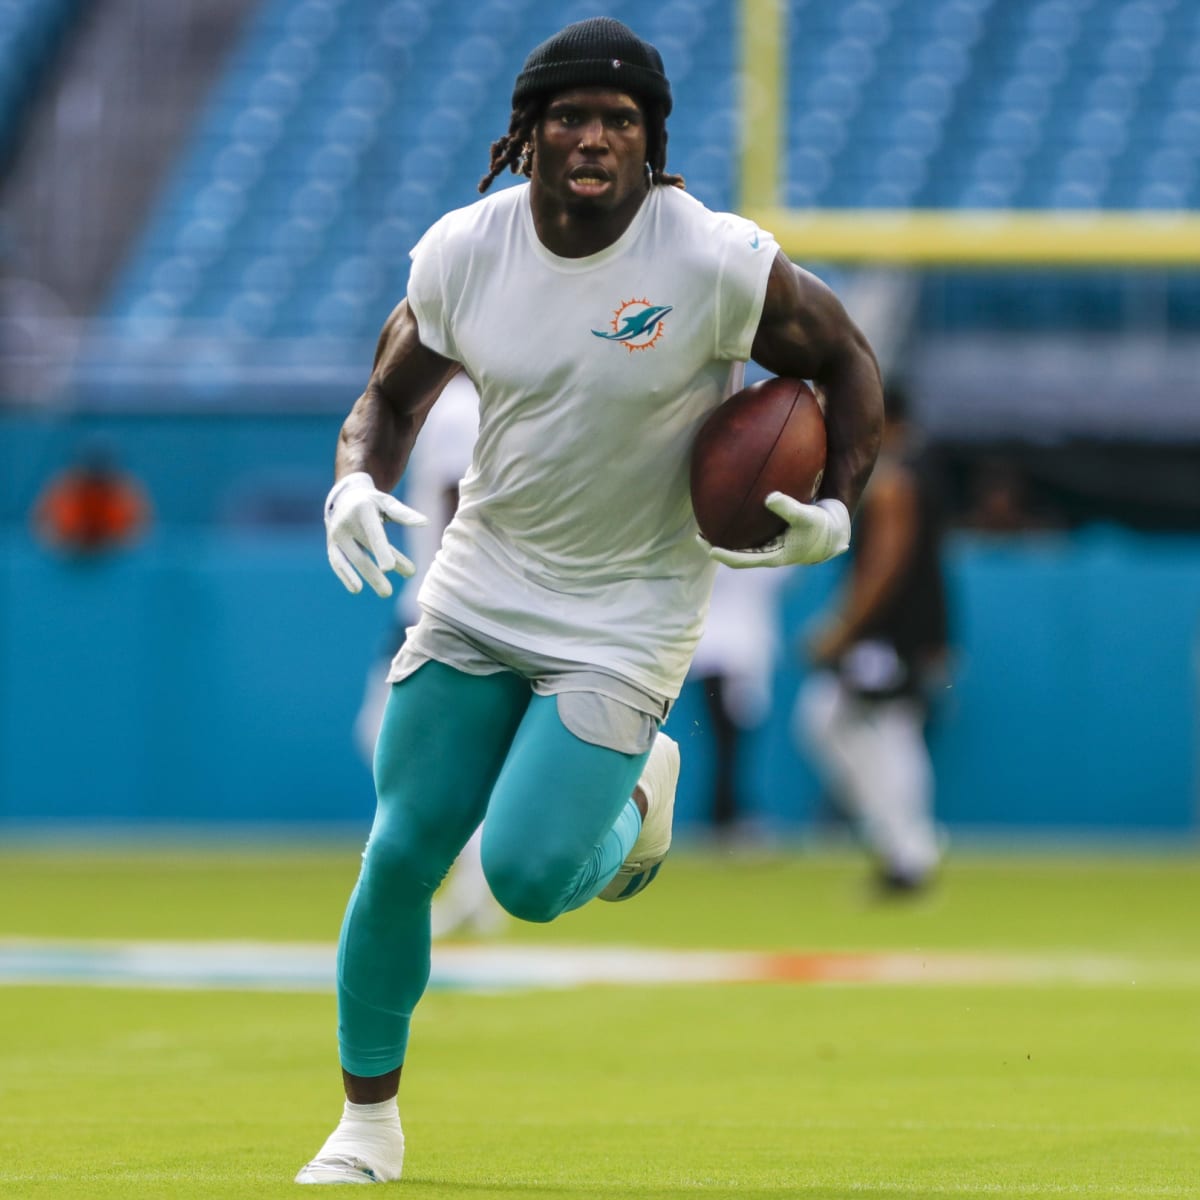 Miami Dolphins WR Tyreek Hill being investigated after alleged battery -  Buffalo Rumblings